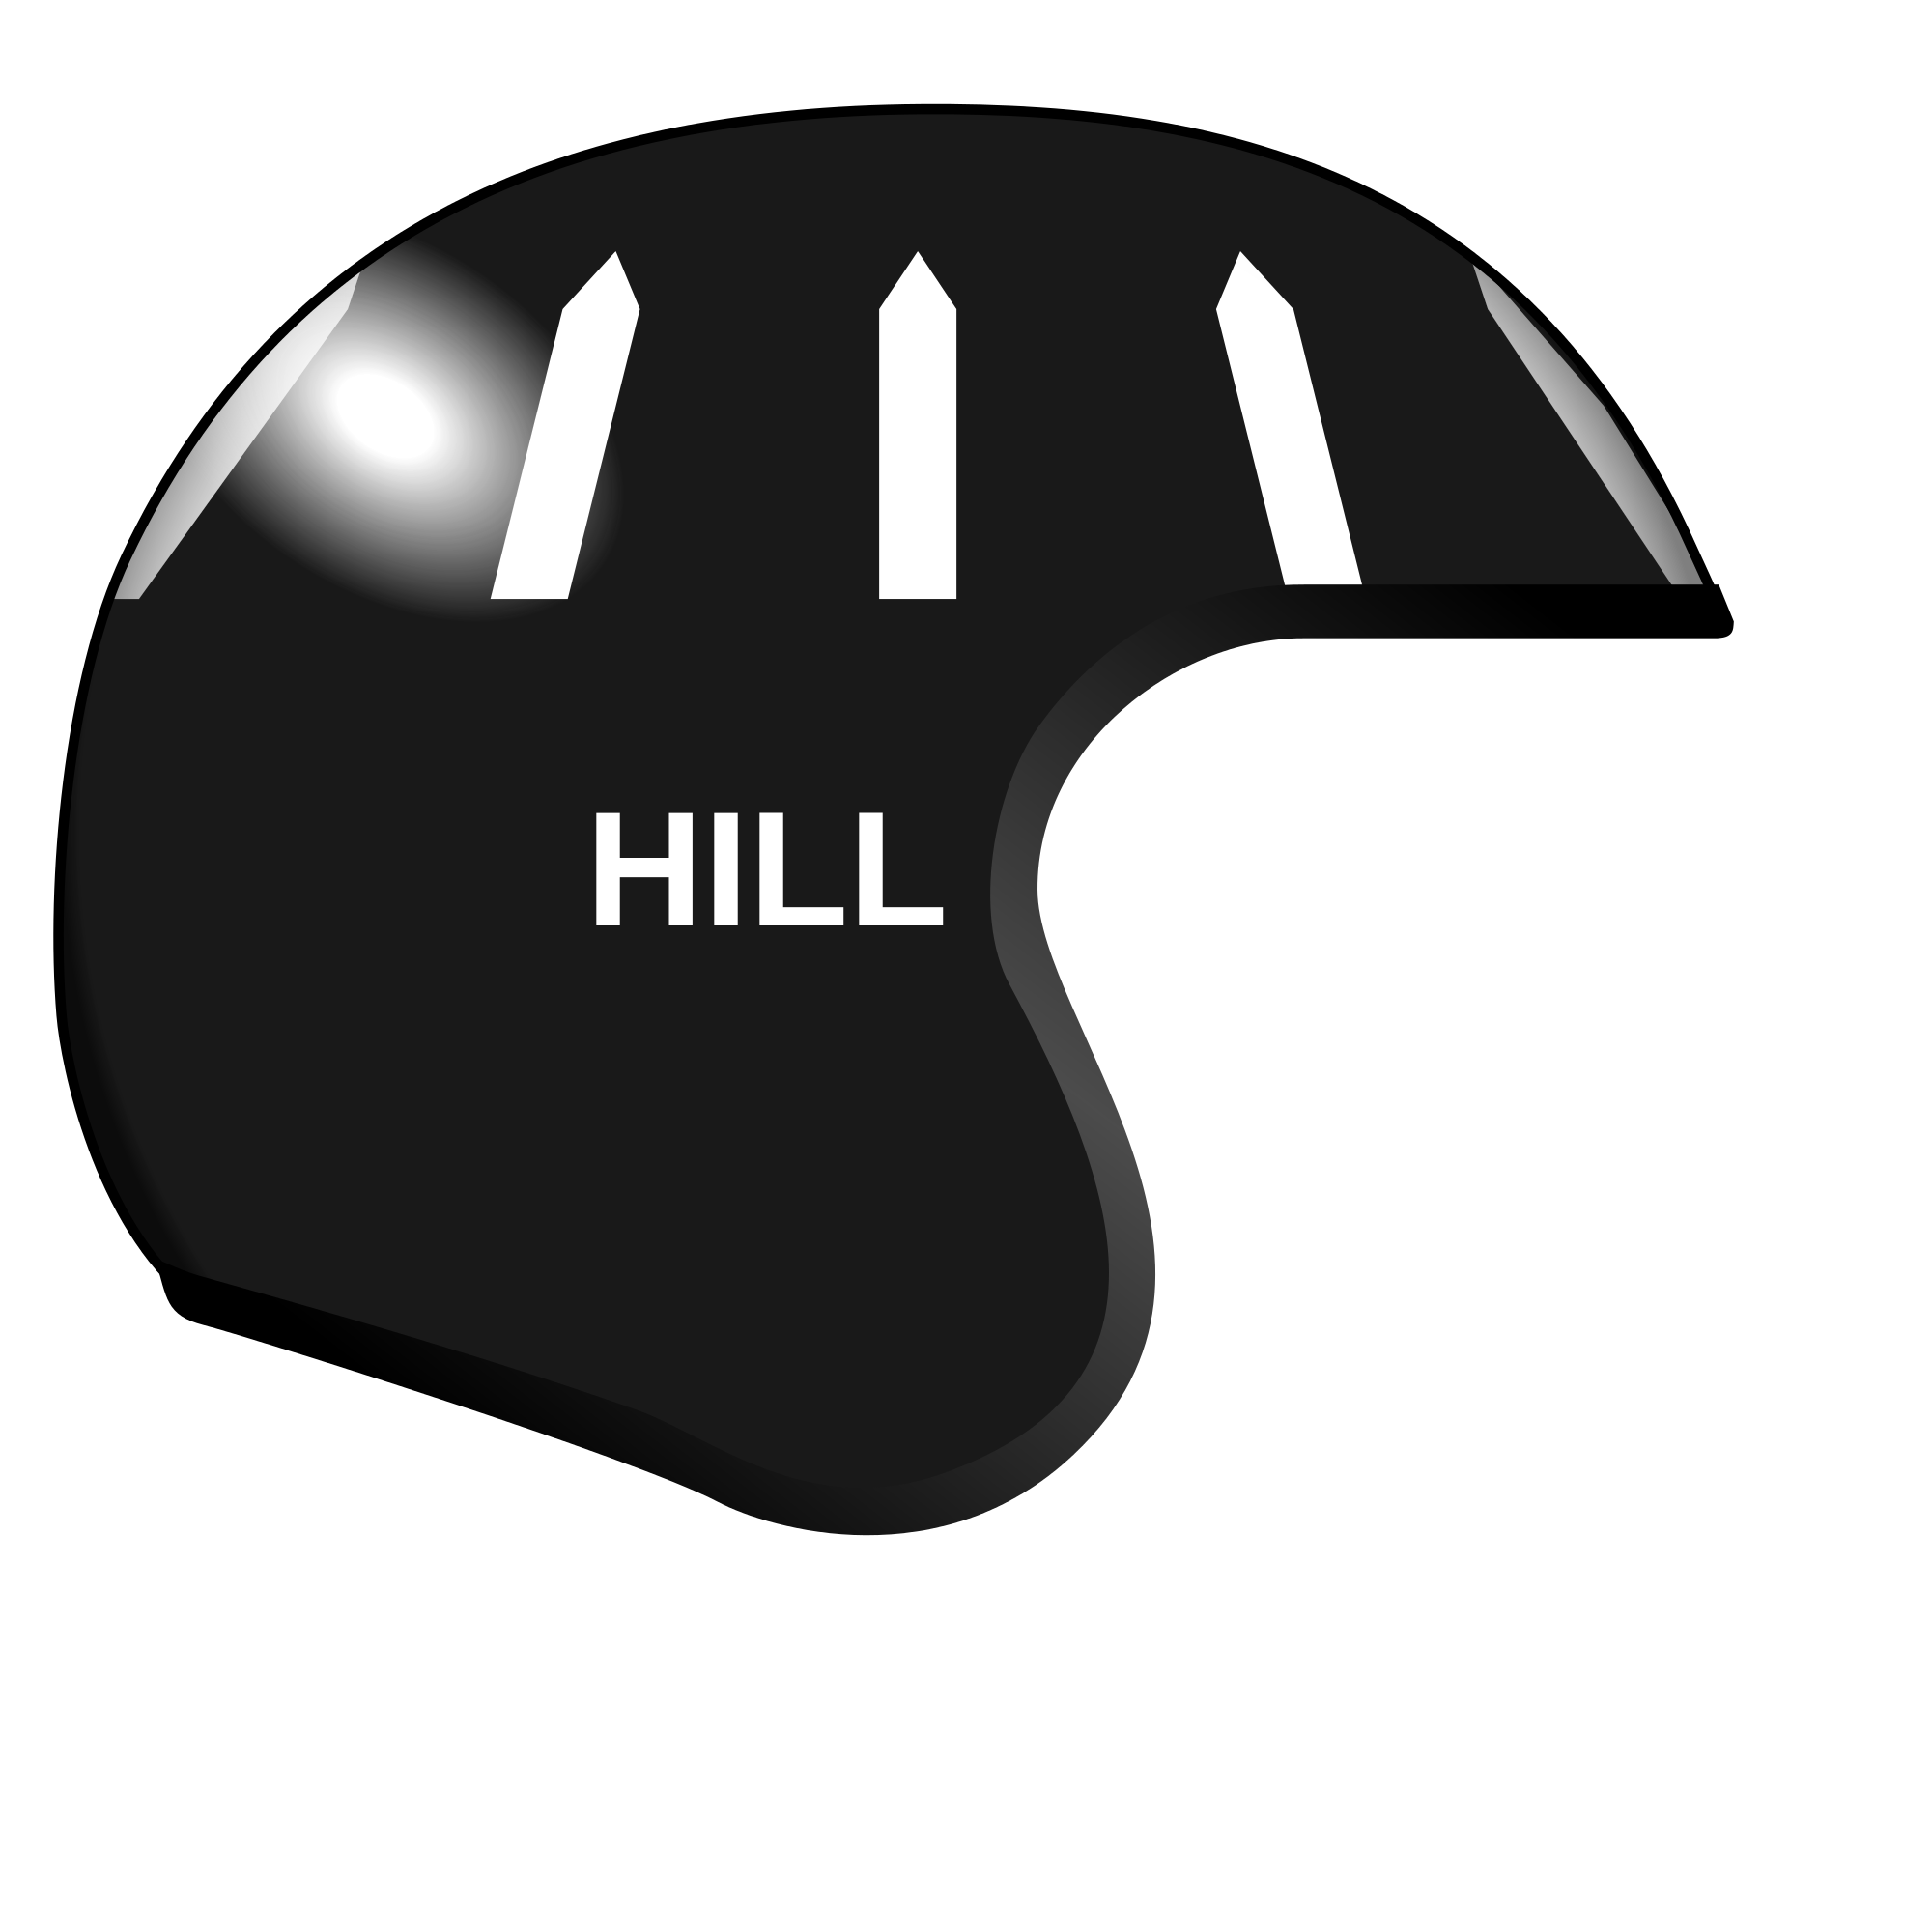 Hill svg #7, Download drawings